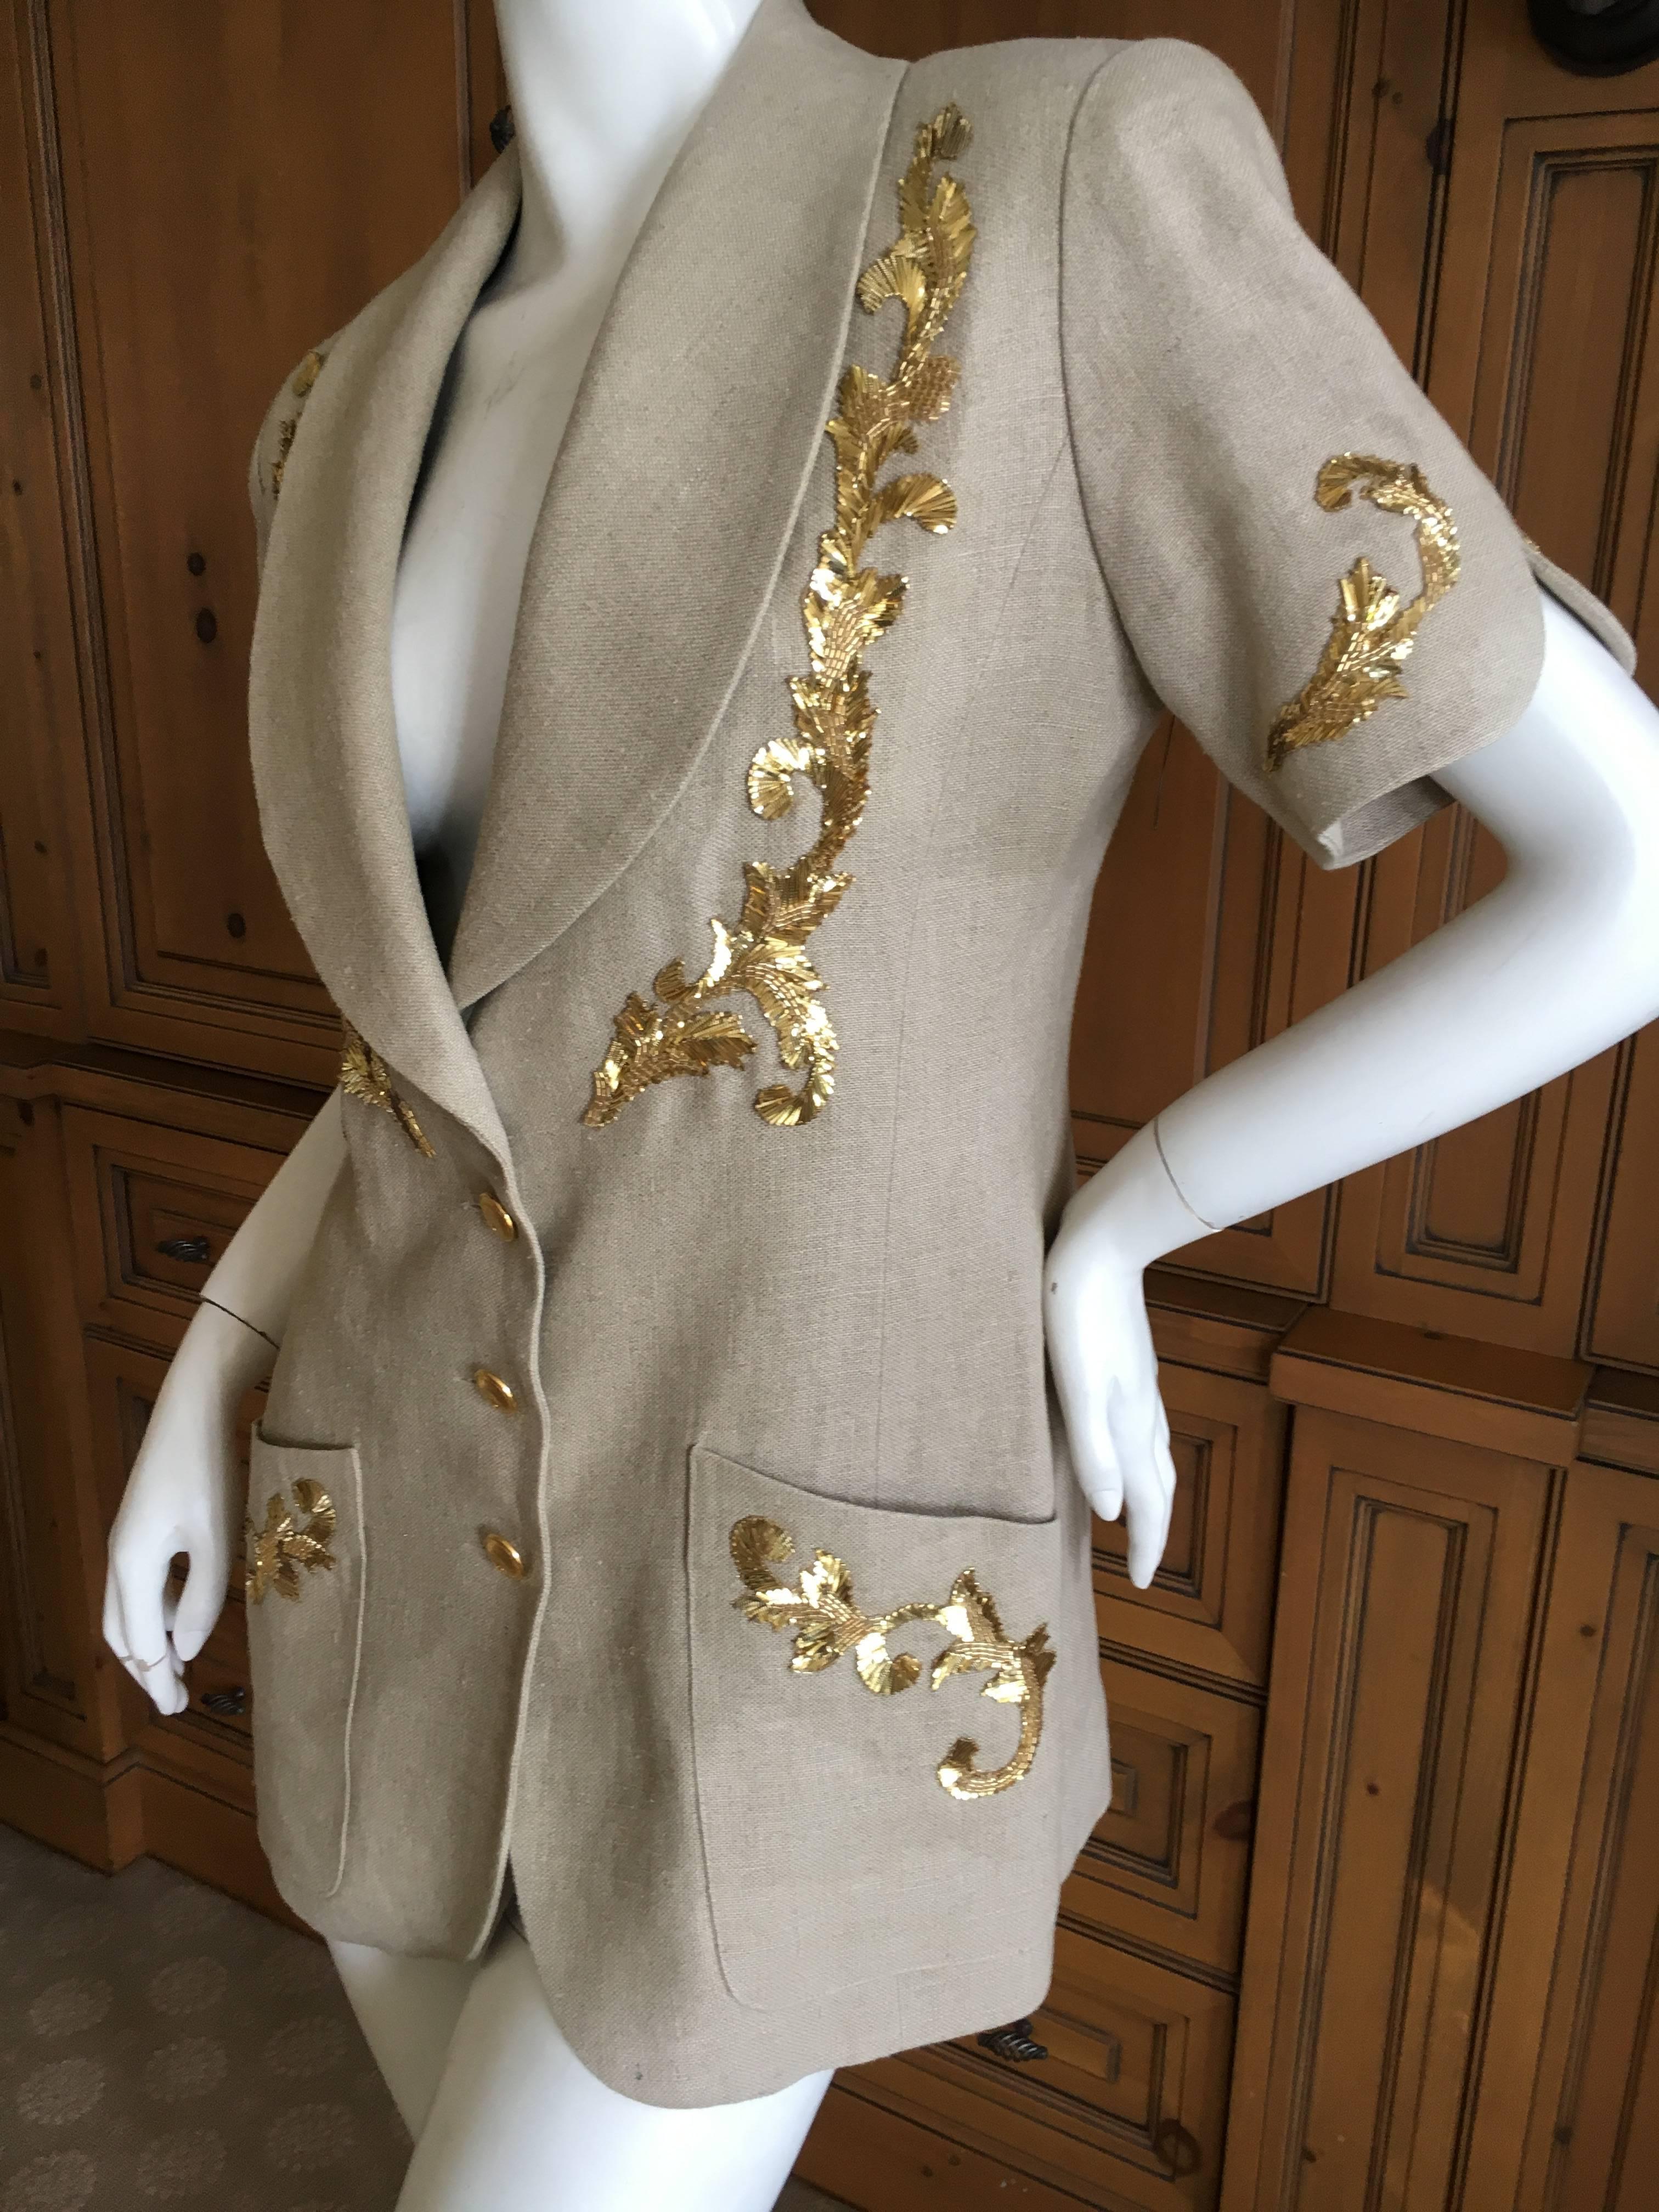 Wonderful vintage short sleeve jacket with goldwork and beading in baroque cartouche patterns by Lesage for Chanel.
There is no size label, it is appx size 40
Bust 40"
Waist 32"
Length 34"
Excellent condition